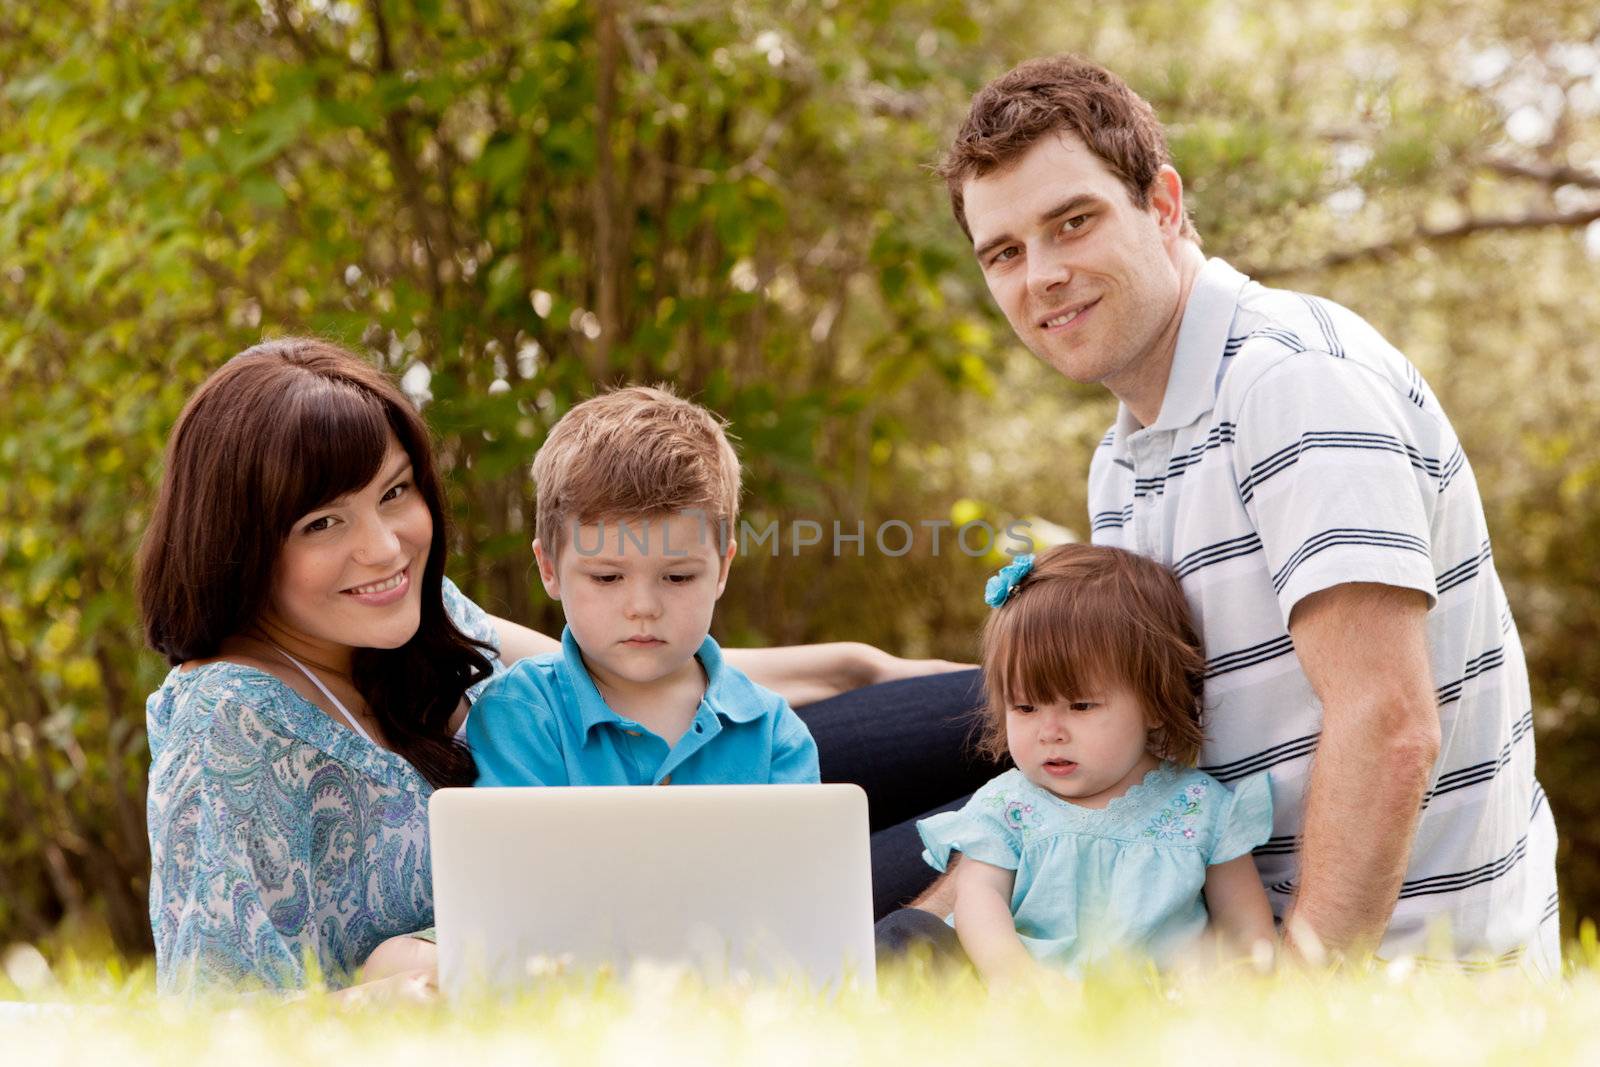 Outdoor Family with Computer by leaf